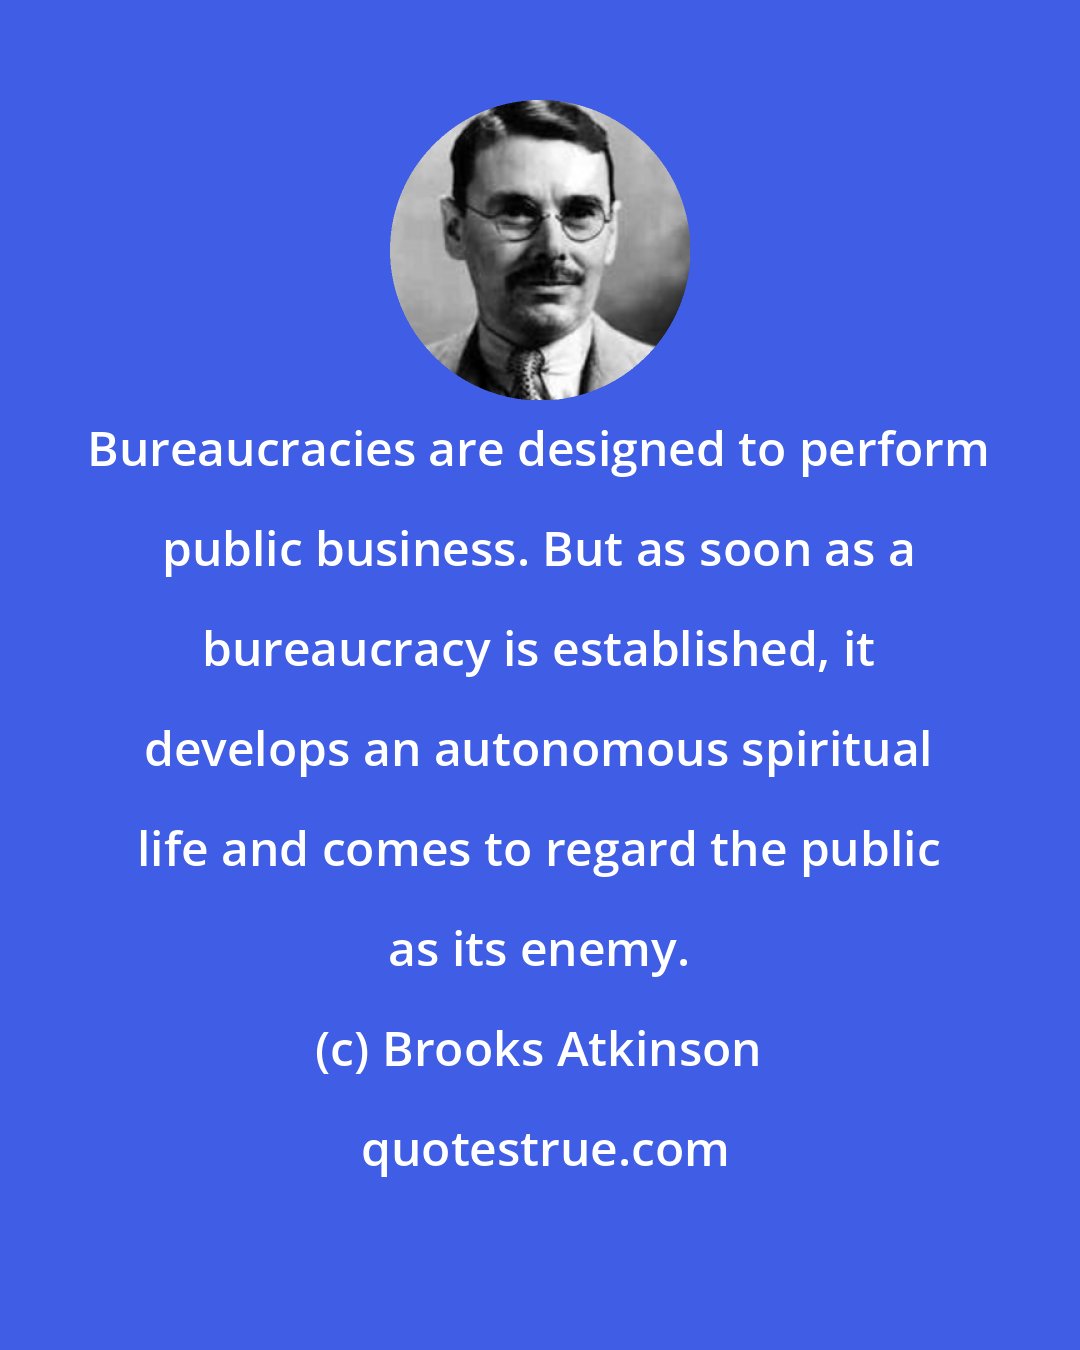 Brooks Atkinson: Bureaucracies are designed to perform public business. But as soon as a bureaucracy is established, it develops an autonomous spiritual life and comes to regard the public as its enemy.